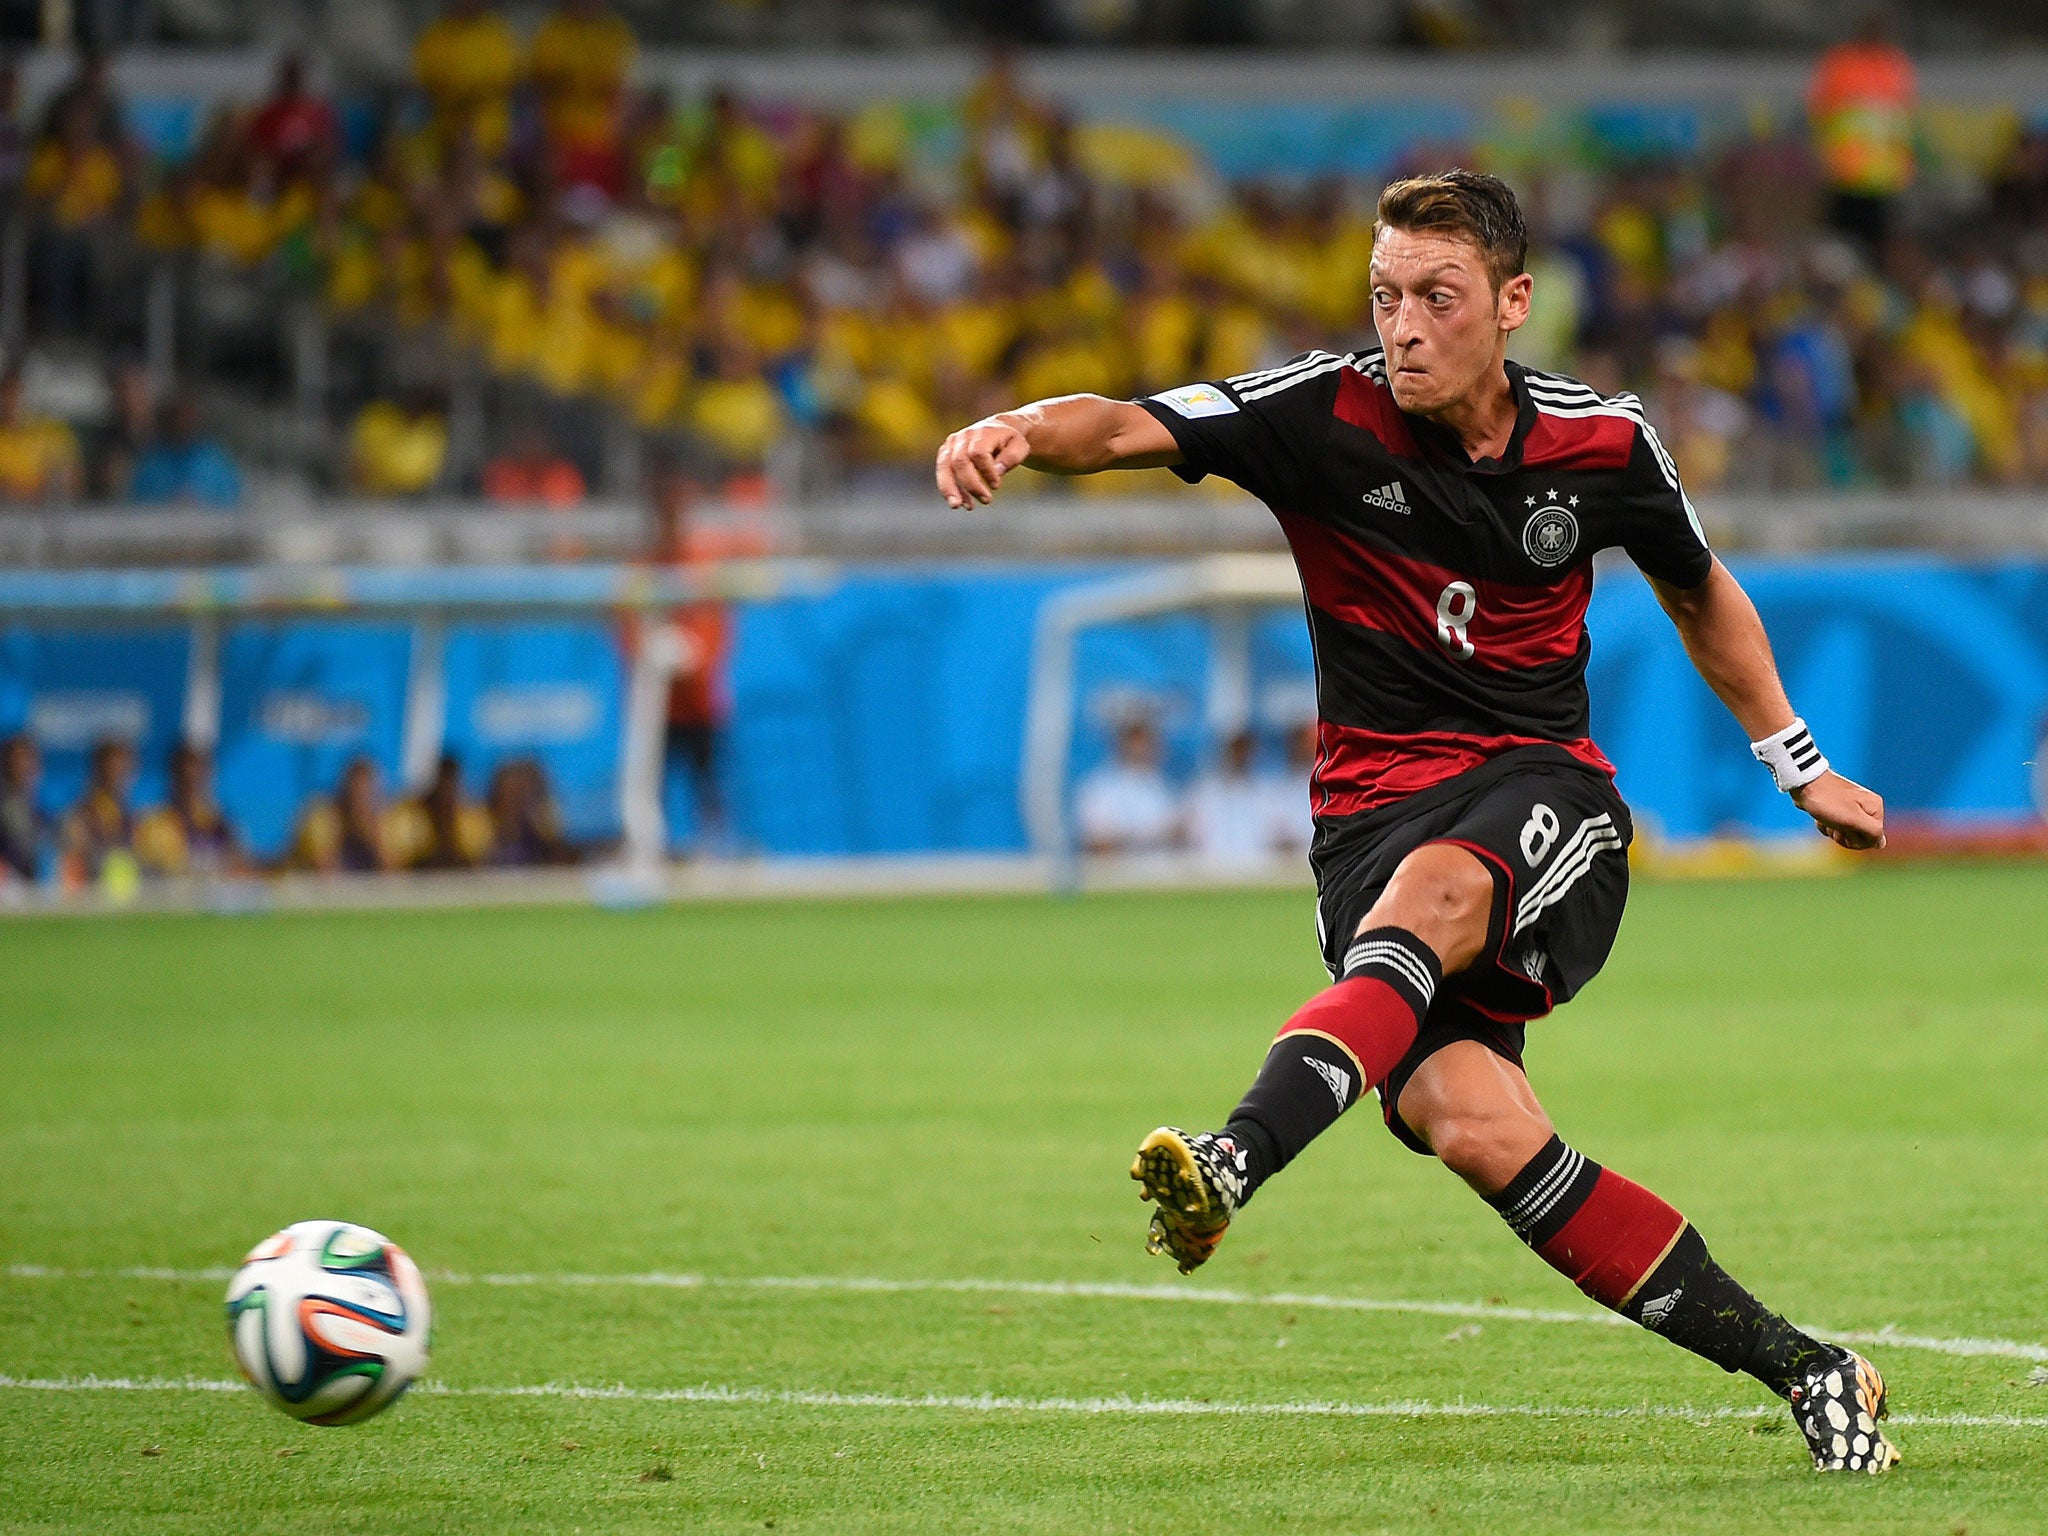 Mesut Ozil has an effort on goal, which drifts agonisingly wide of the post